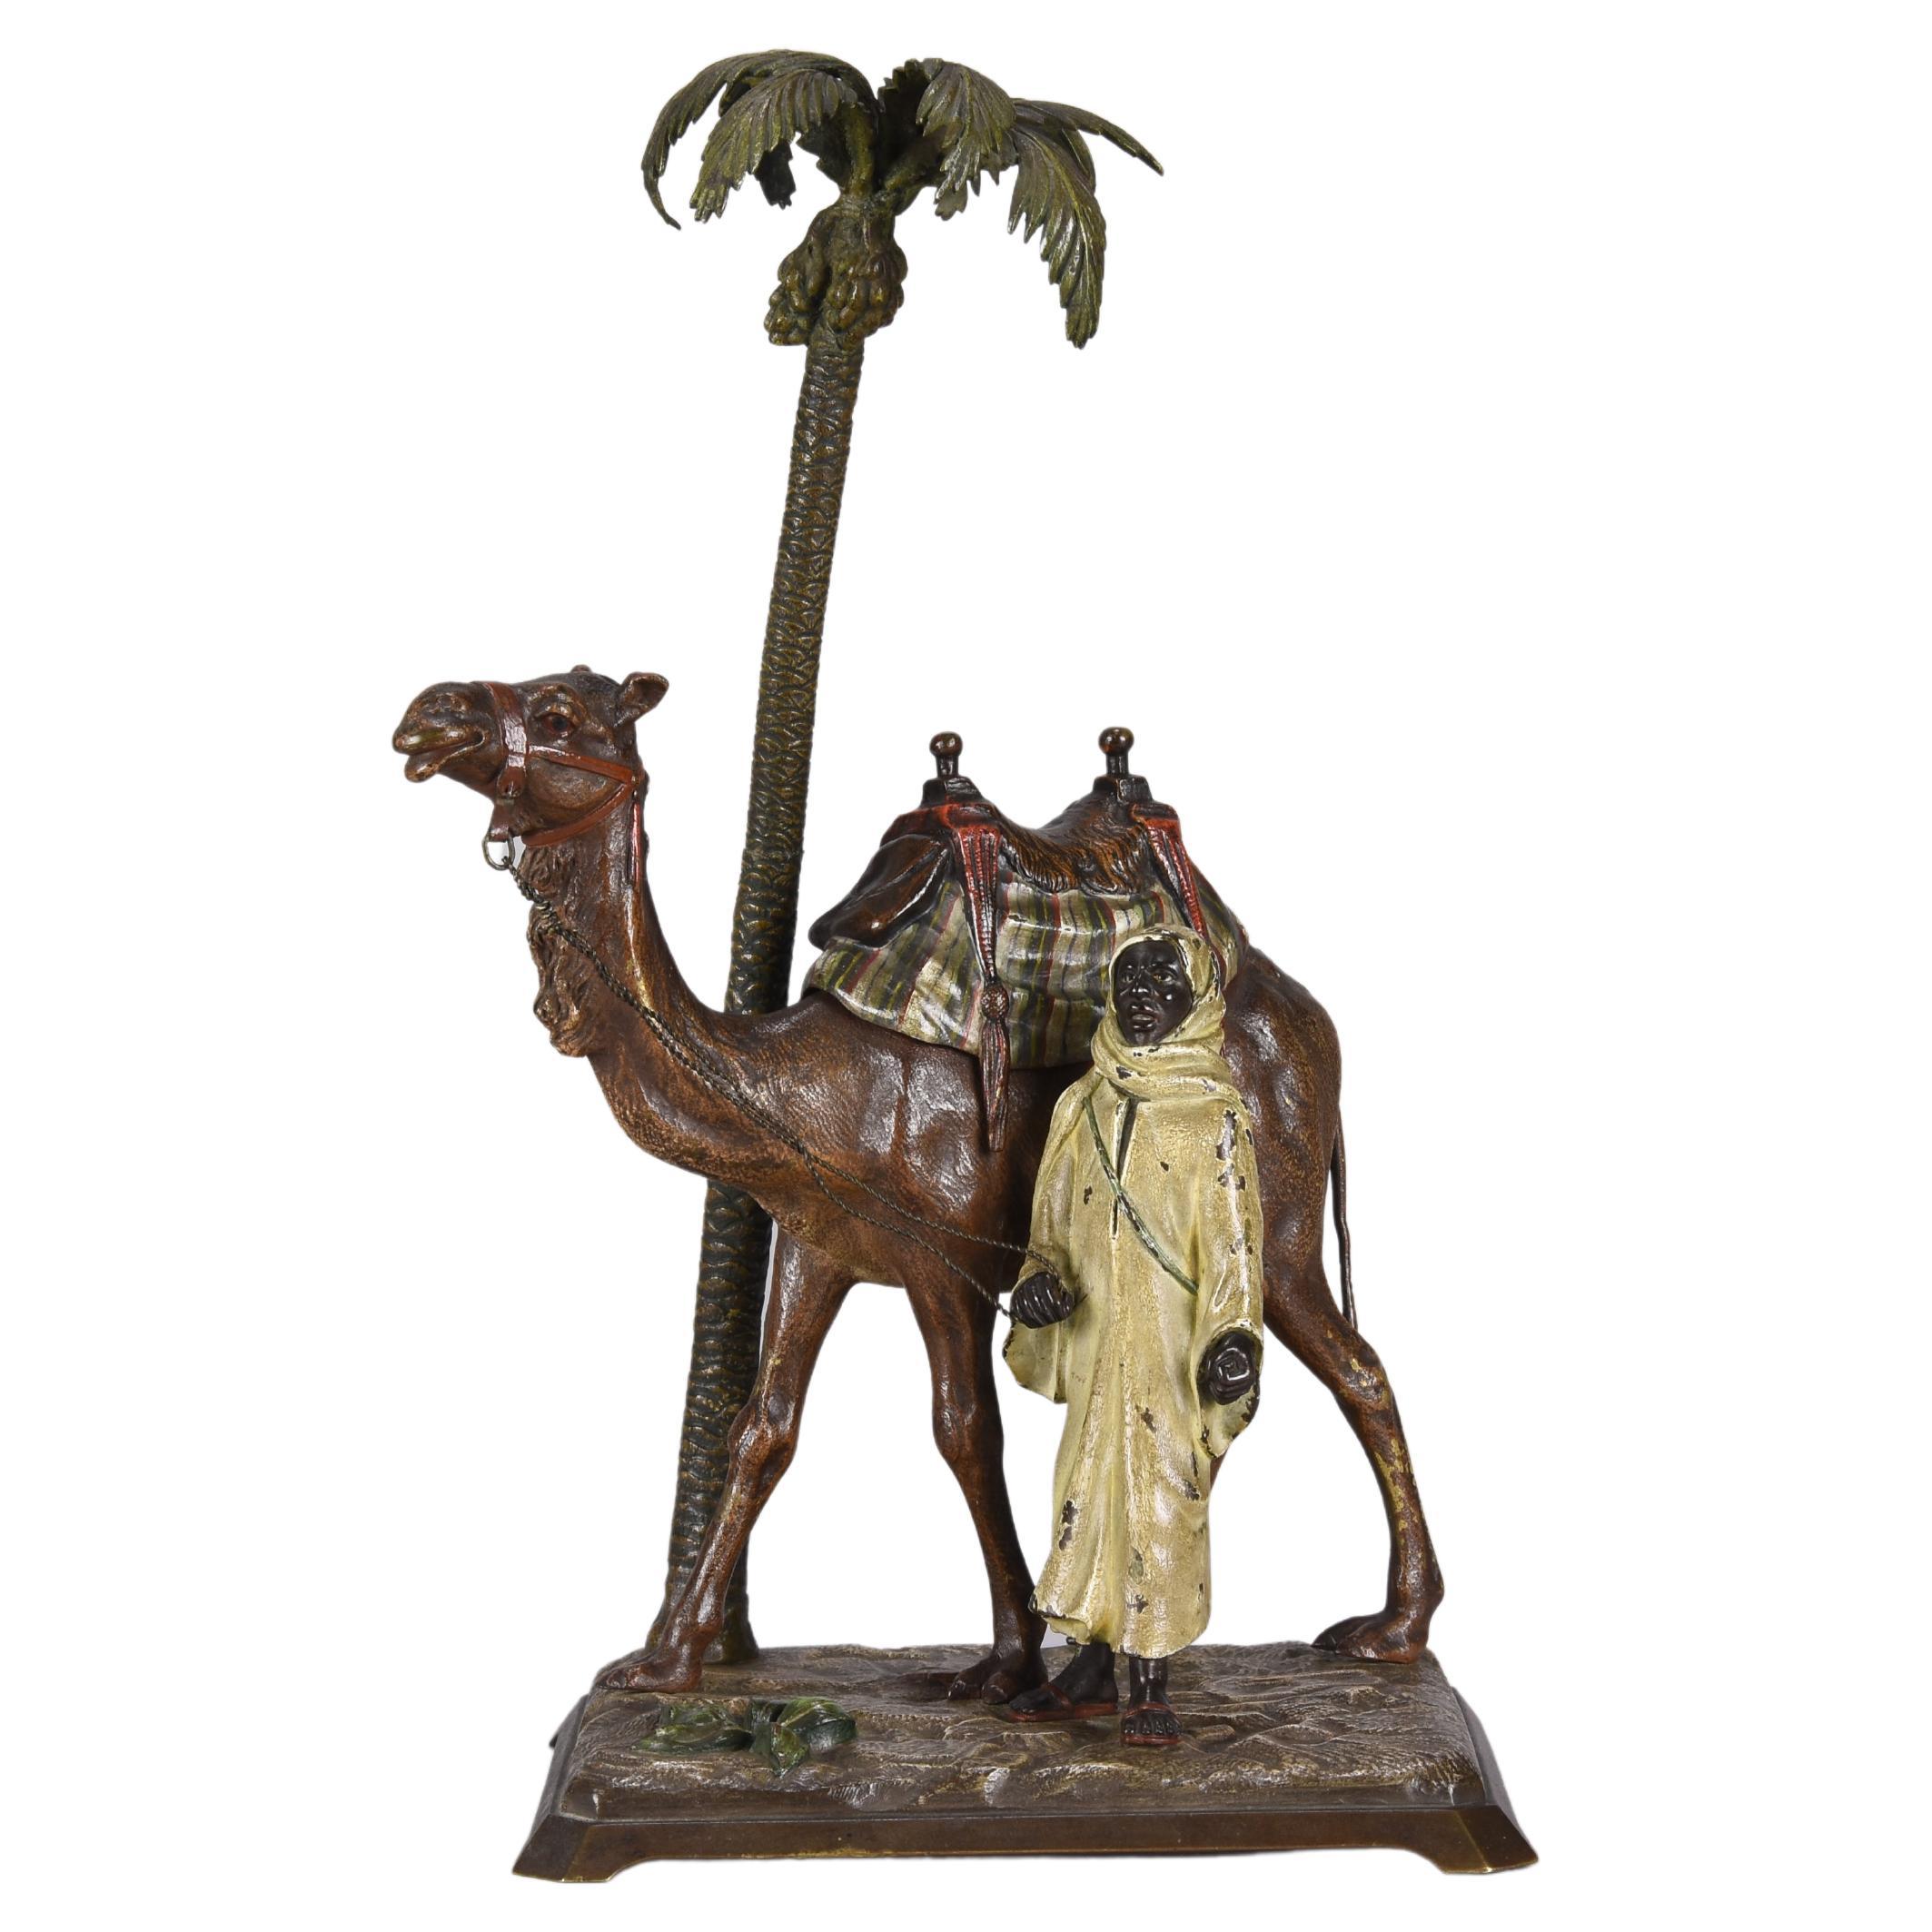 Cold Painted Bronze Entitled "Bedouin with Camel under Palm Tree" by Bergman